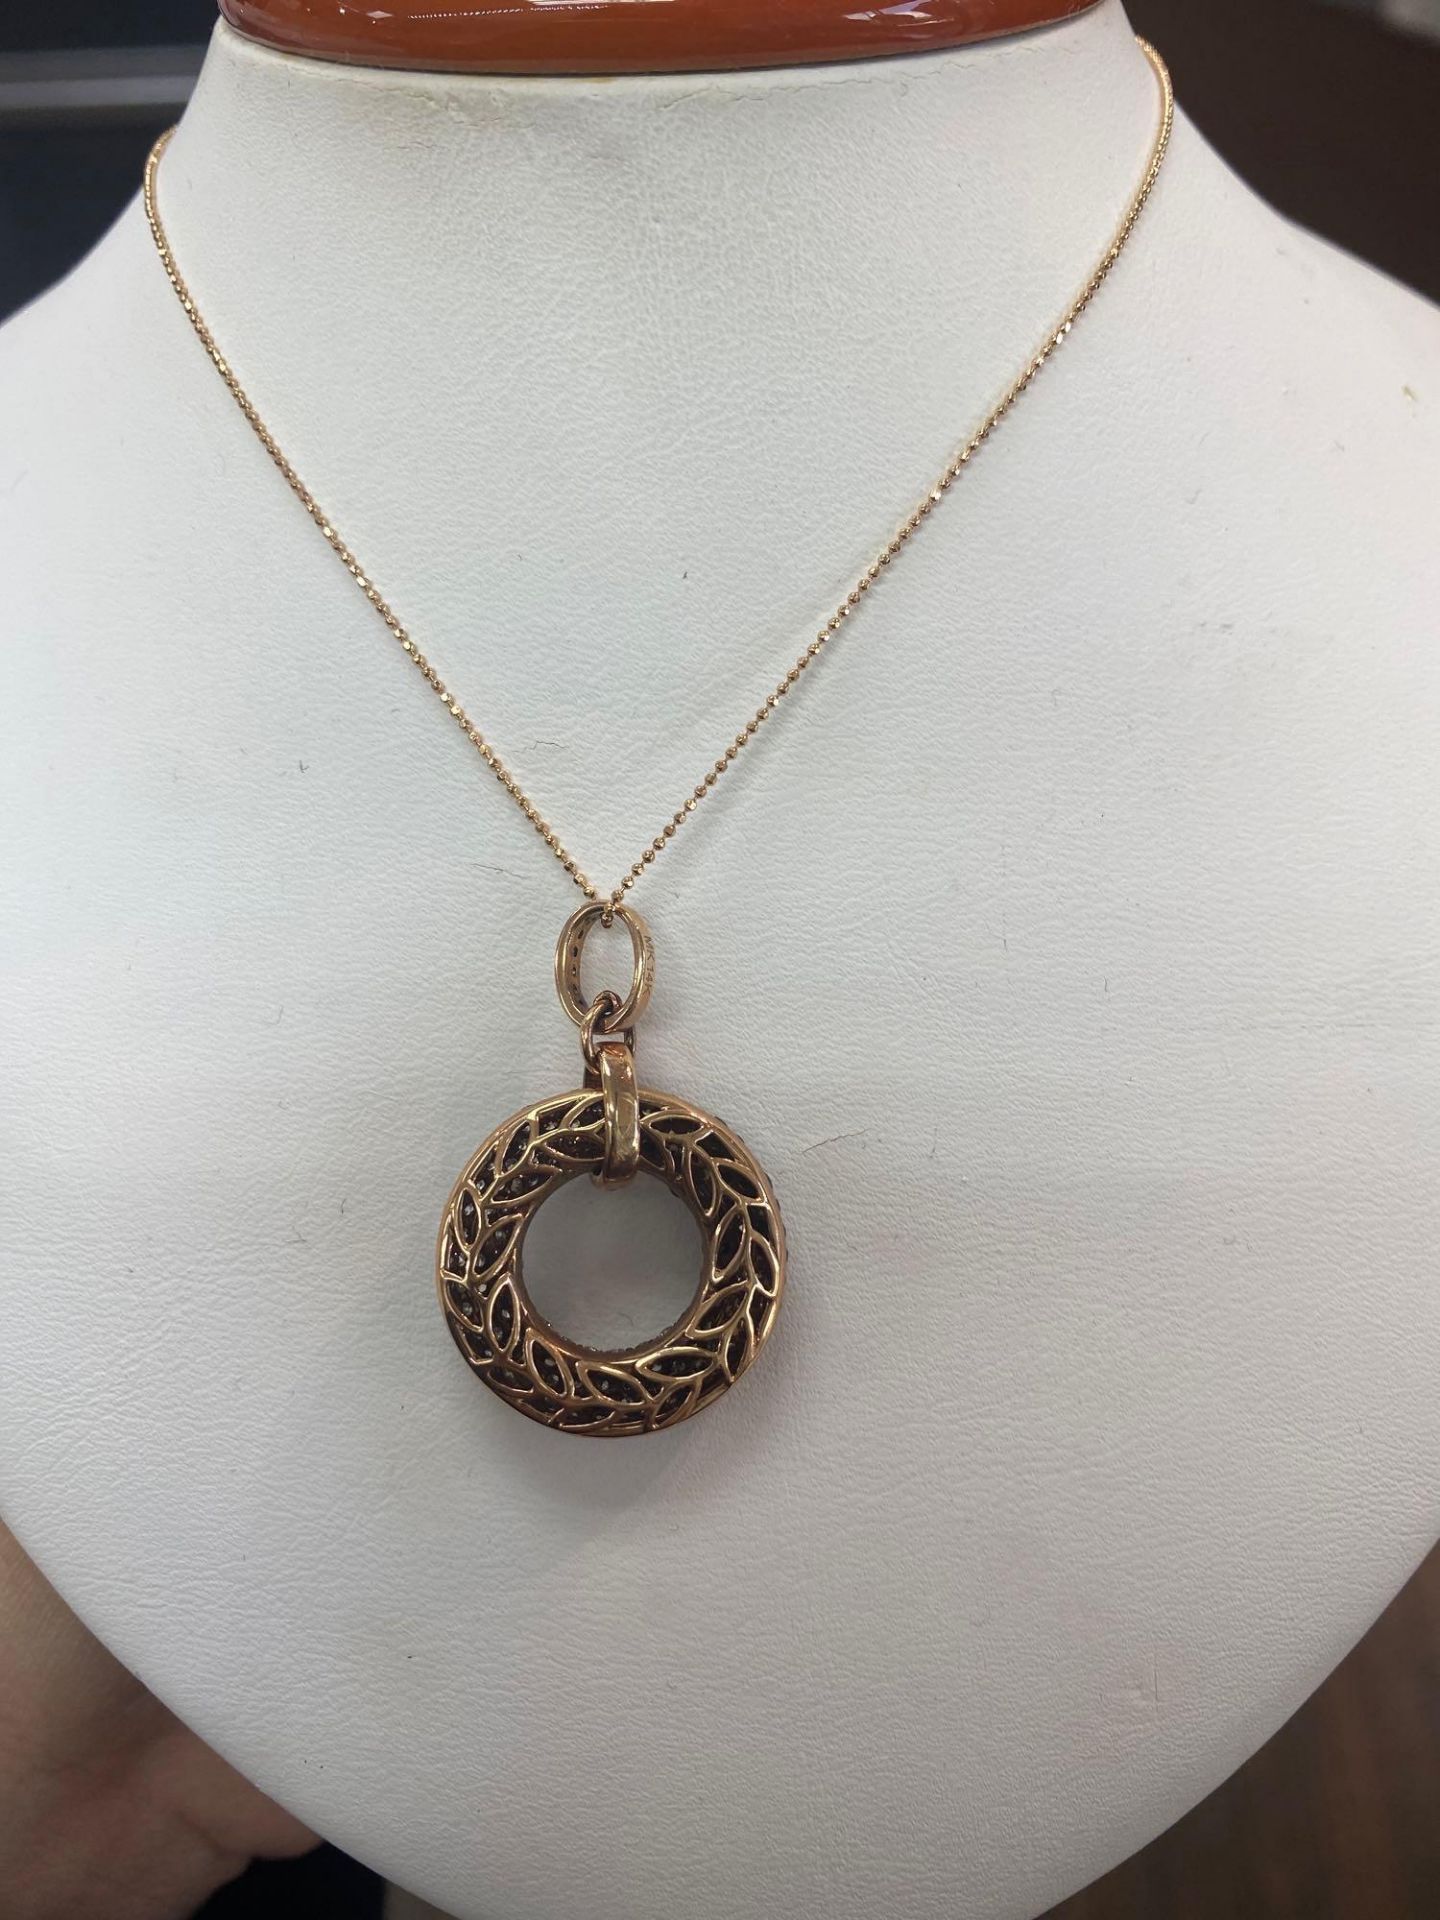 .85CT WHITE DIA. .37CT BLK DIA. .75CT BROWN DIA. 14K ROSE GOLD PENDANT AND CHAIN - Image 3 of 5